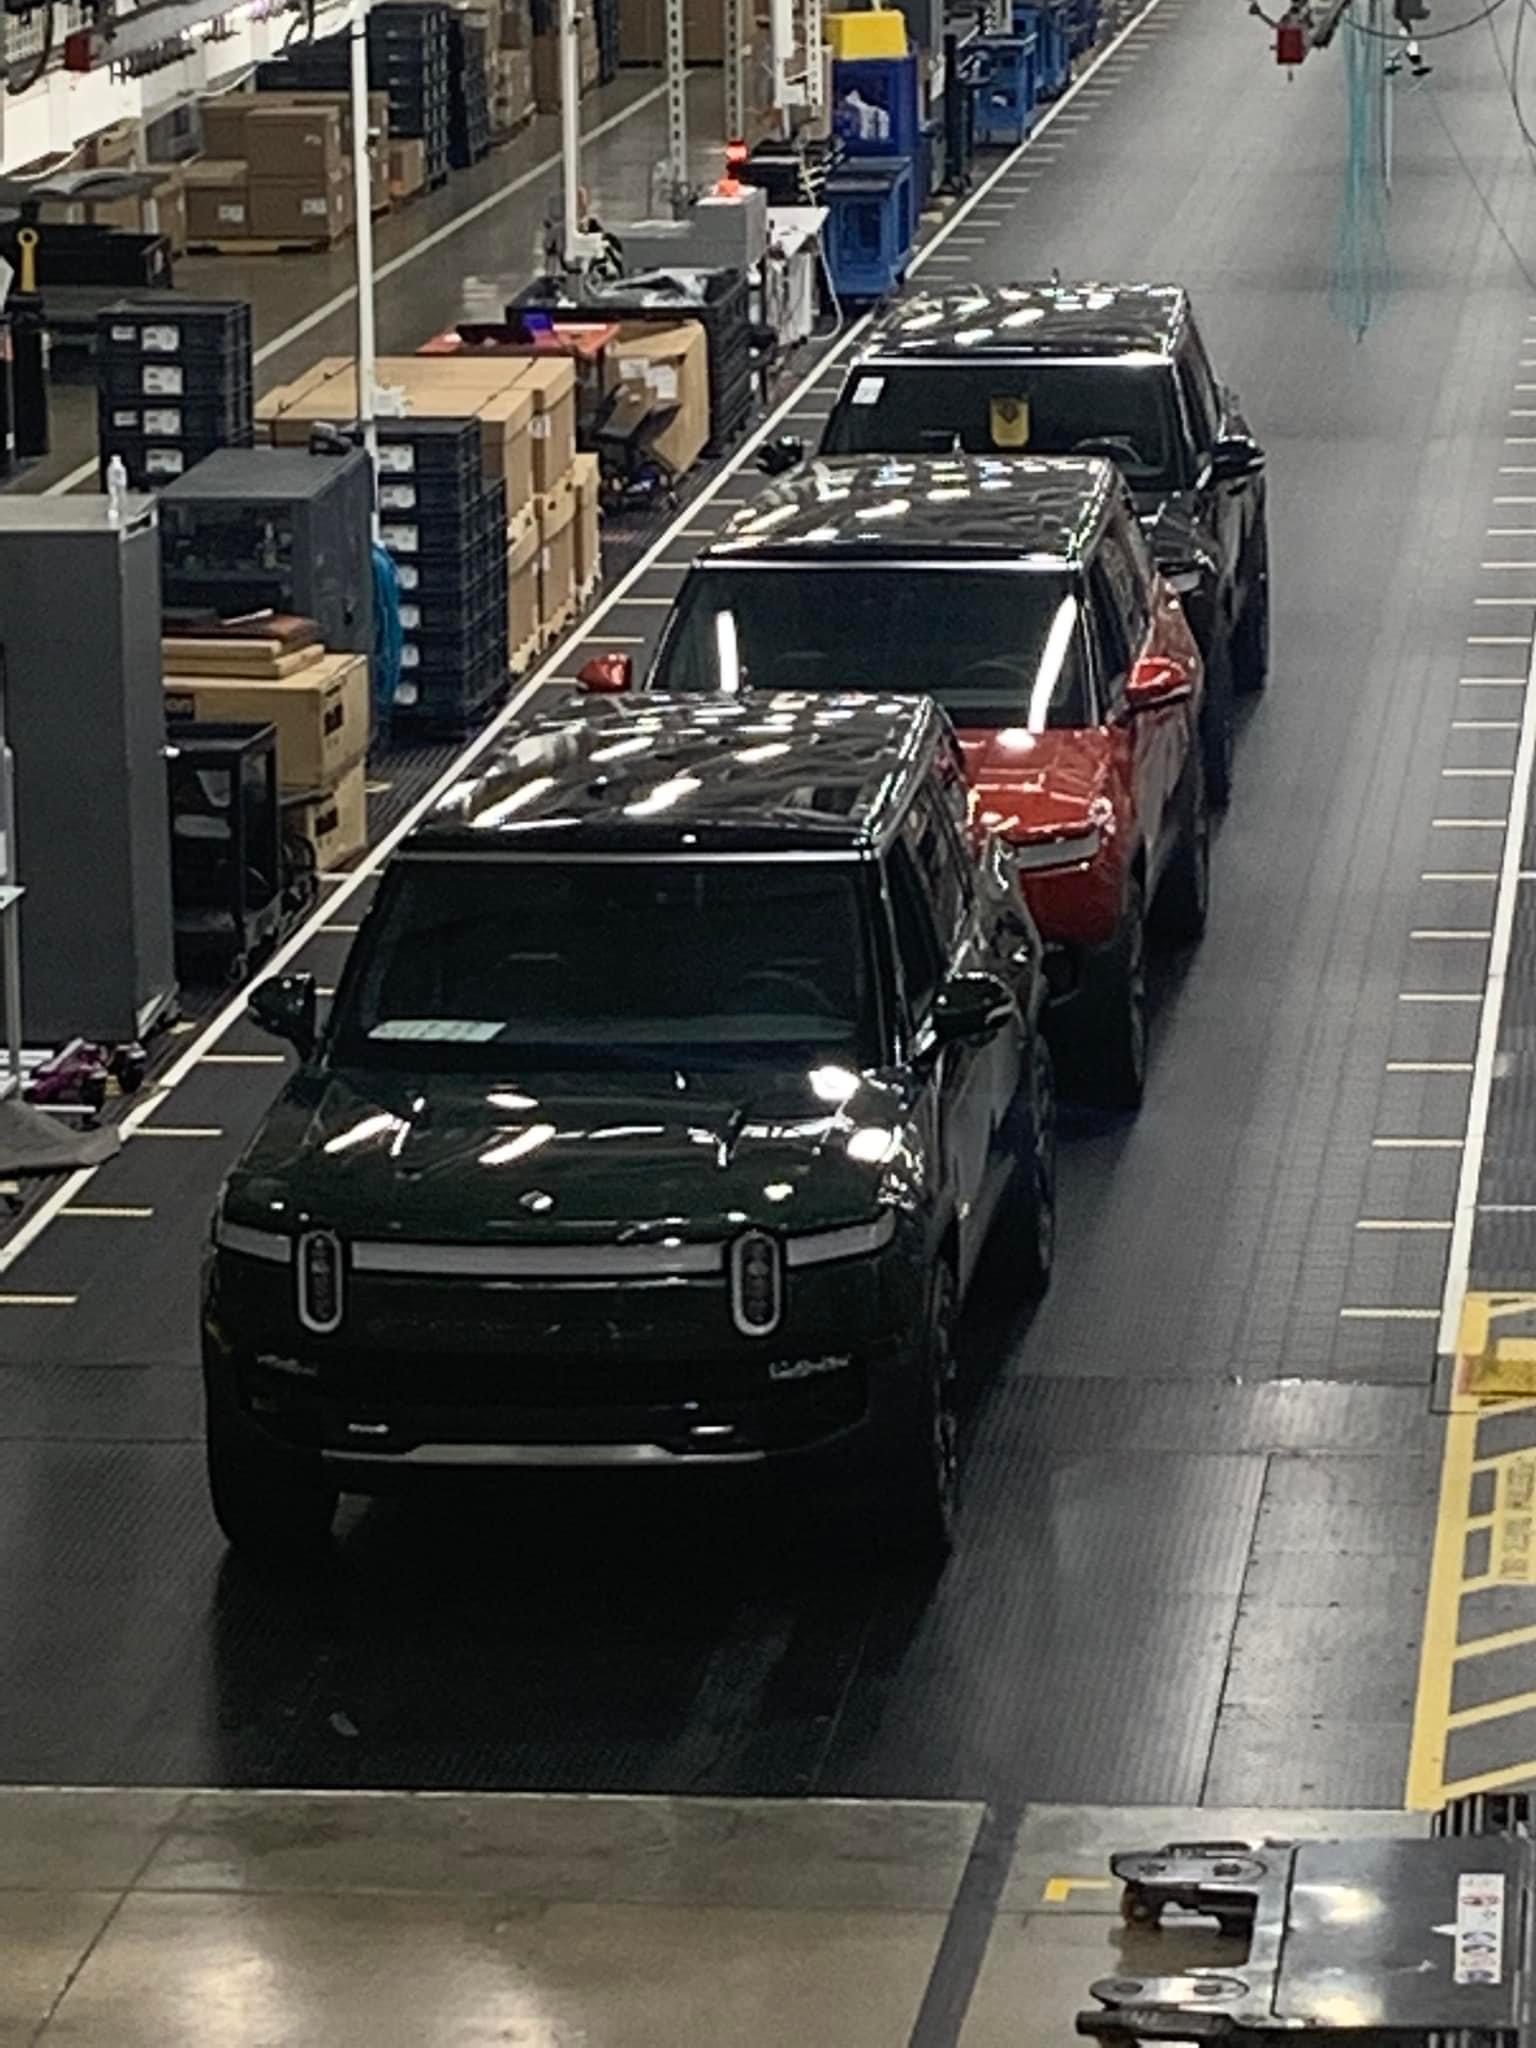 Rivian R1T R1S Tons of Rivians & Amazon Vans ready to ship... photos [removed at request of Rivian] 3136A833-018E-4128-8BFE-8193E59A27F6